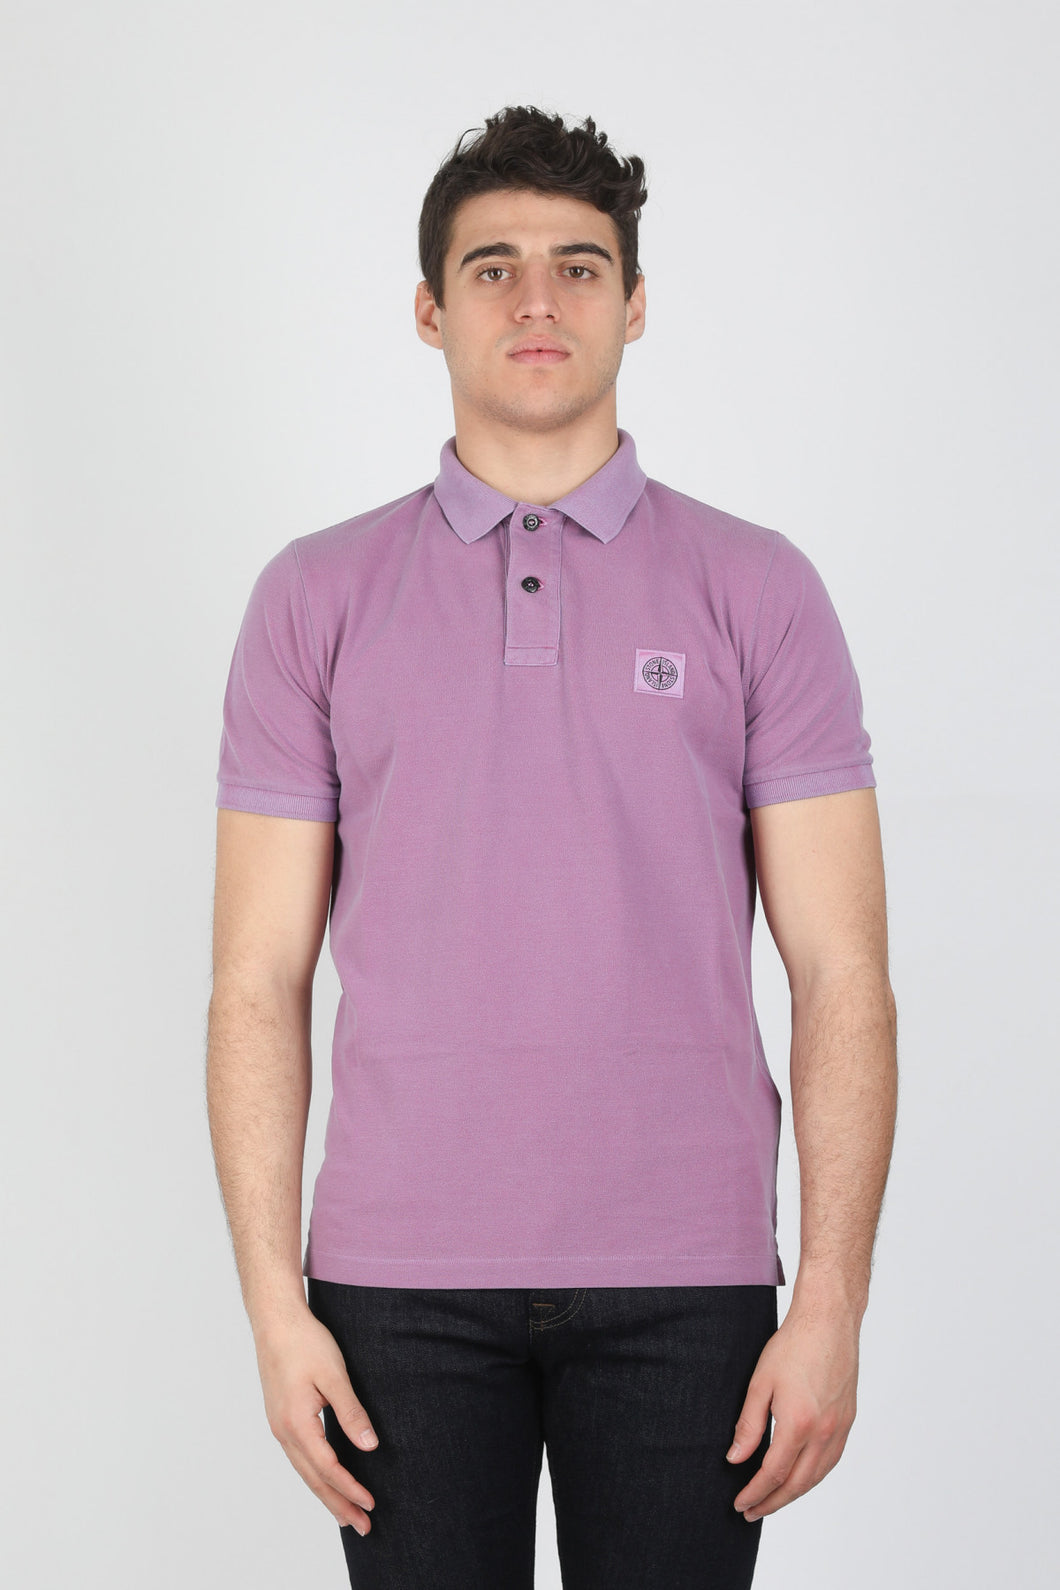 Stone Island Garment Dyed Slim Fit Polo Shirt In Pink